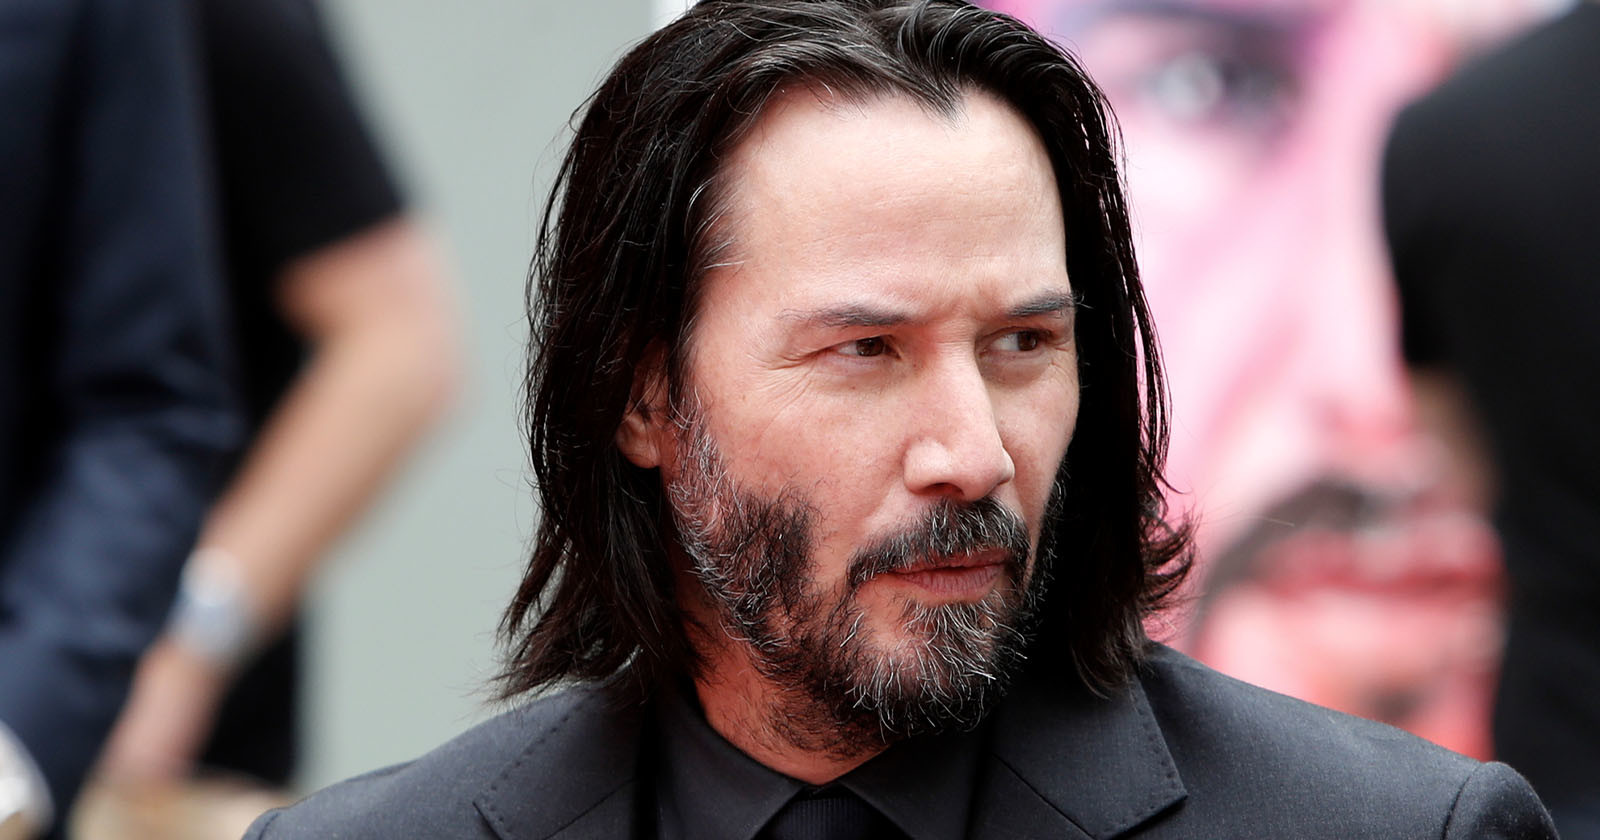  keanu reeves film contract bans deepfake technology 